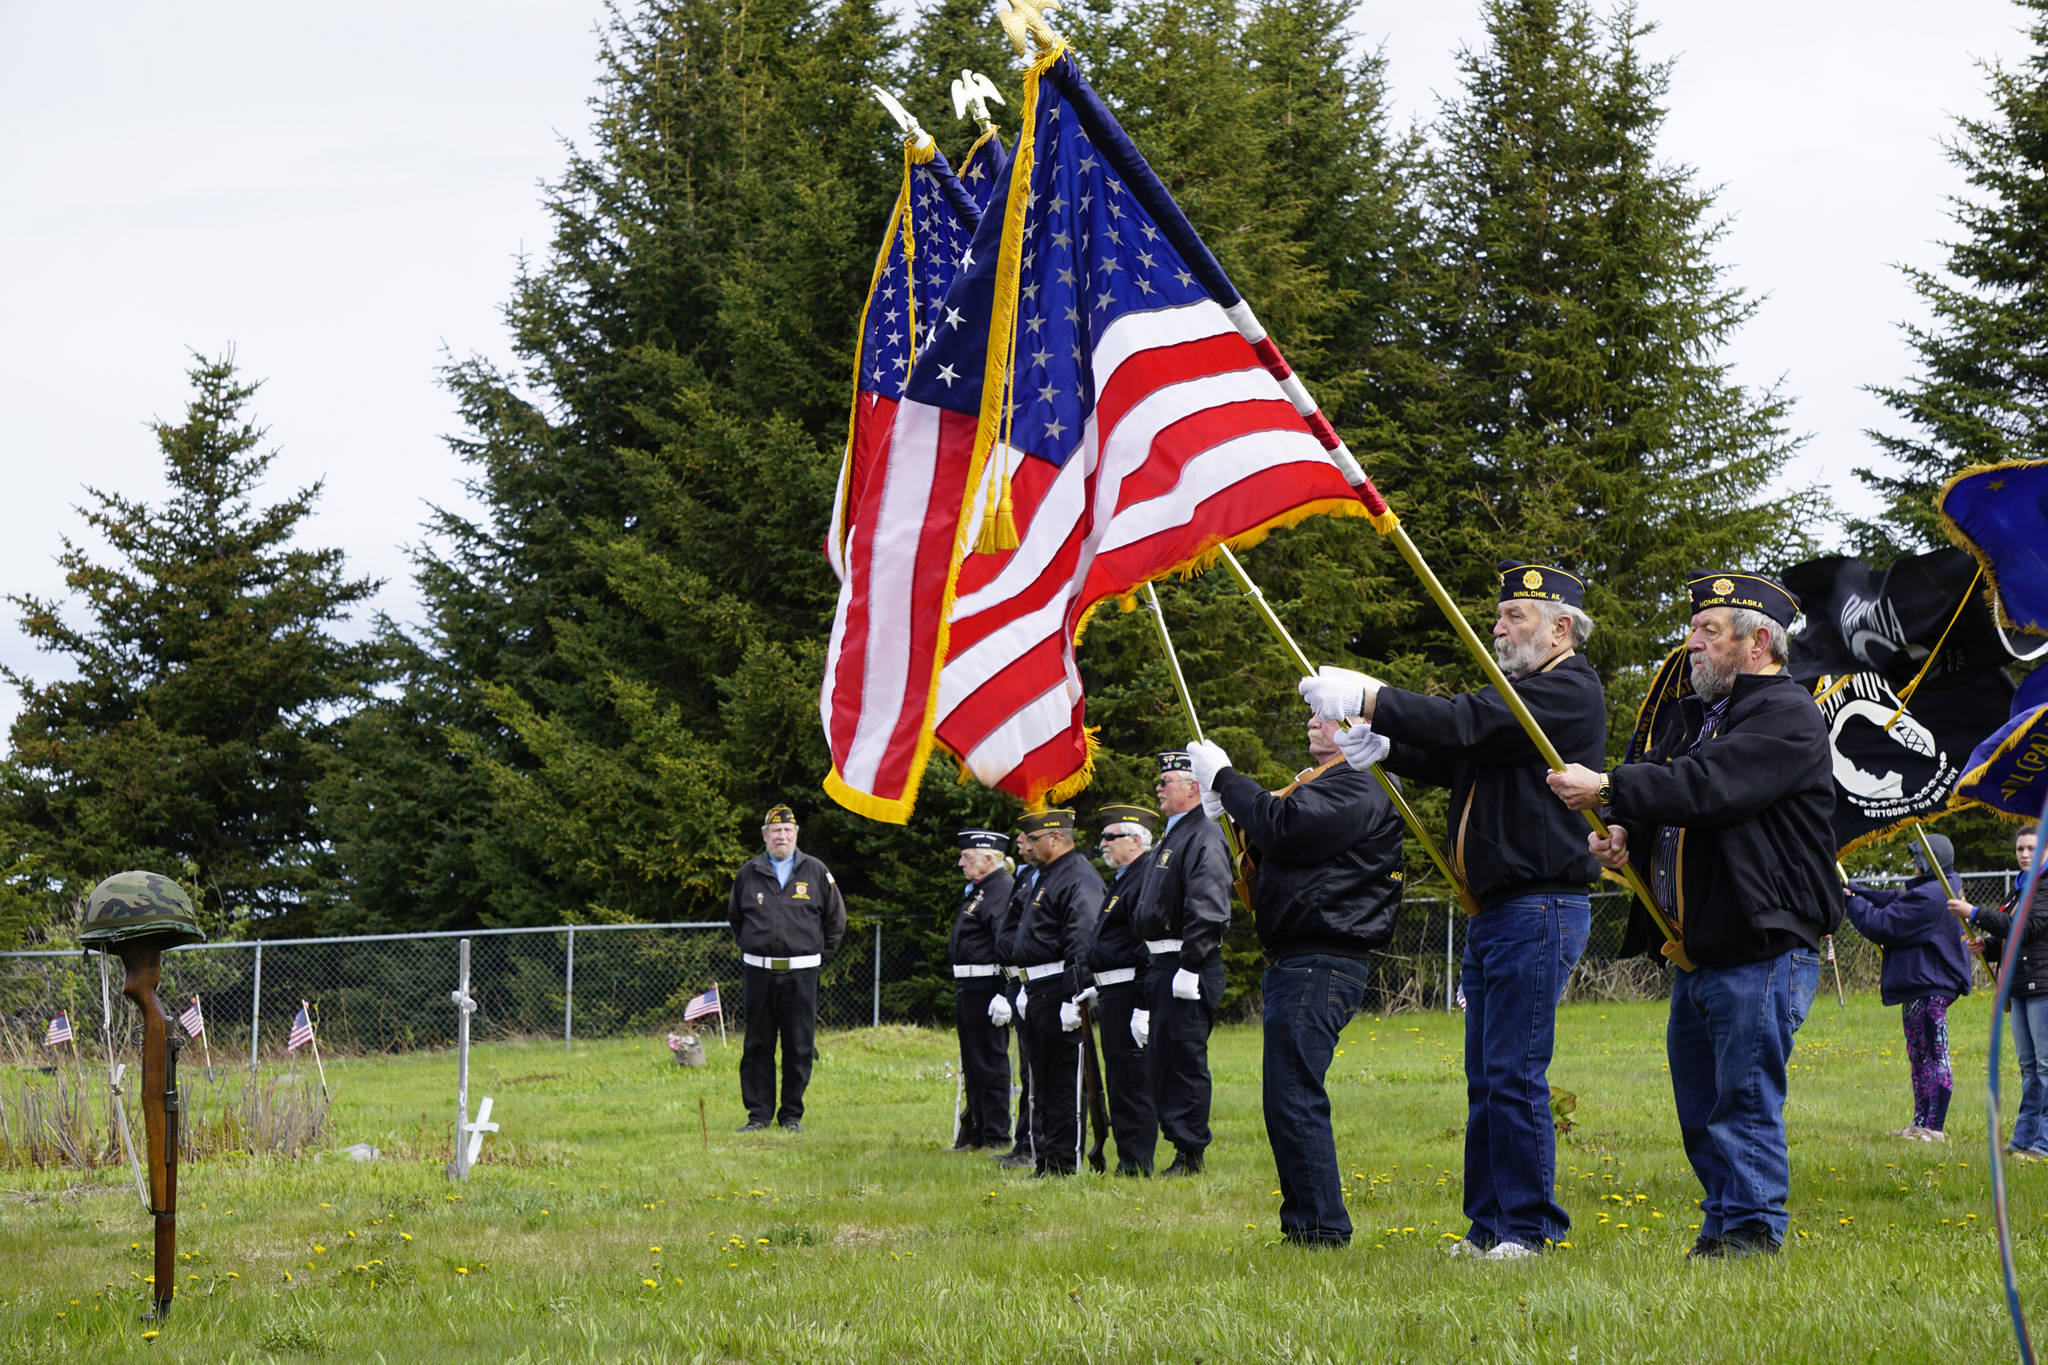 Member of the Veterans of Foreign Wars, Anchor Point, stand at attention during the playing of “Taps” by a bugler with the U.S. Pacific Fleet Band at Memorial Day ceremonies on Monday, May 27, 2019, at Hickerson Memorial Cemetery in Homer, Alaska. About 75 people braved a blustery wind to attend the ceremonies. (Photo by Michael Armstrong/Homer News)